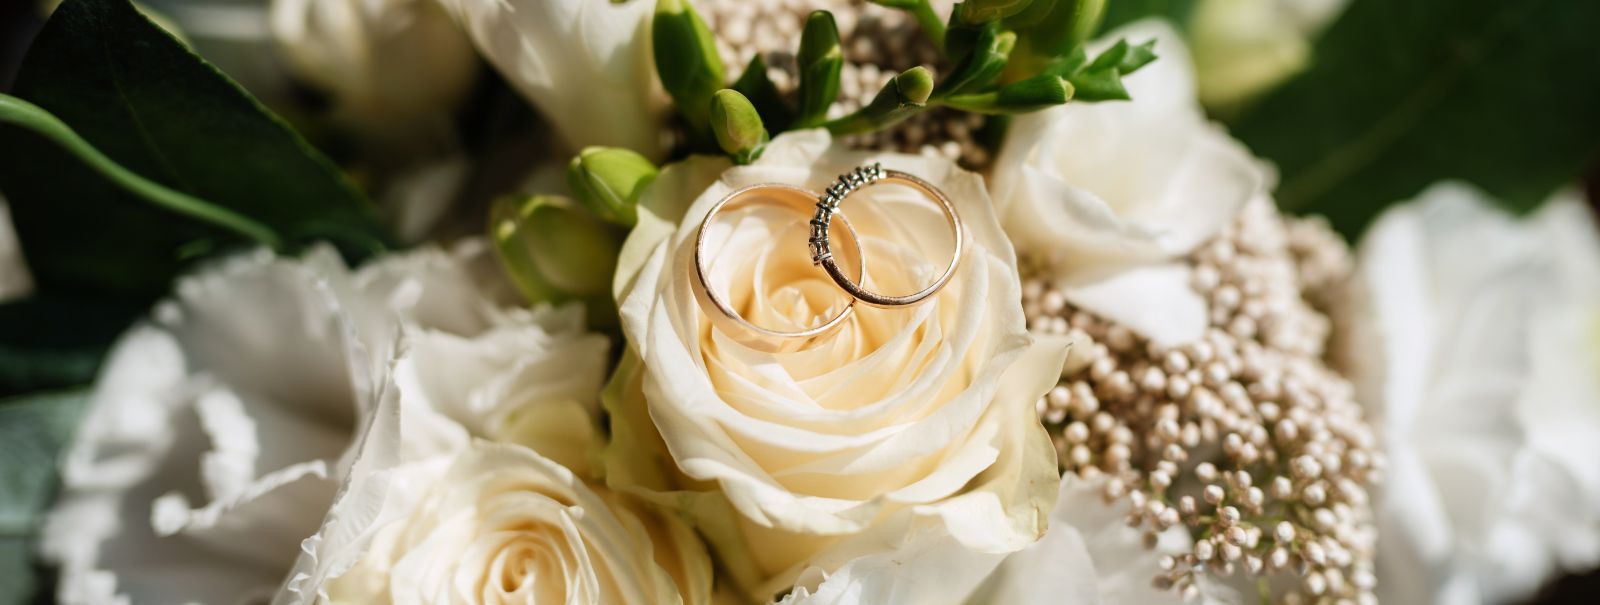 Choosing the perfect bridal bouquet is a key element in wedding planning that complements the bride's style and the overall wedding theme. It's not just an acce